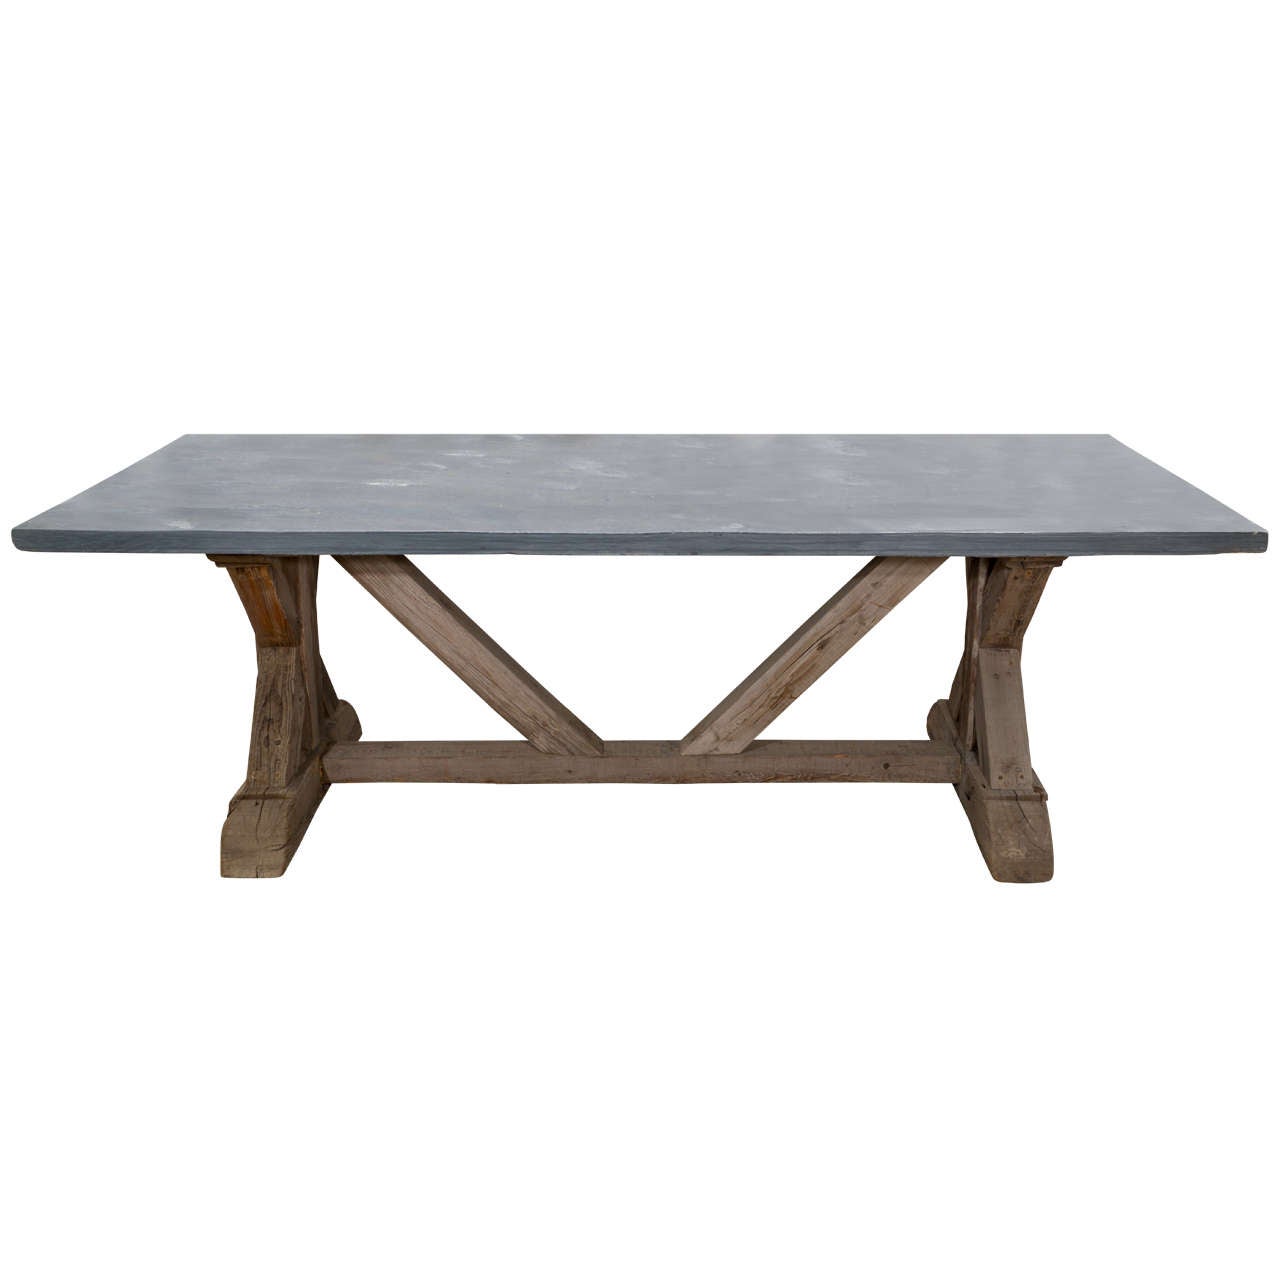 Blue Stone Top Dining Table Made From Reclaimed Pine